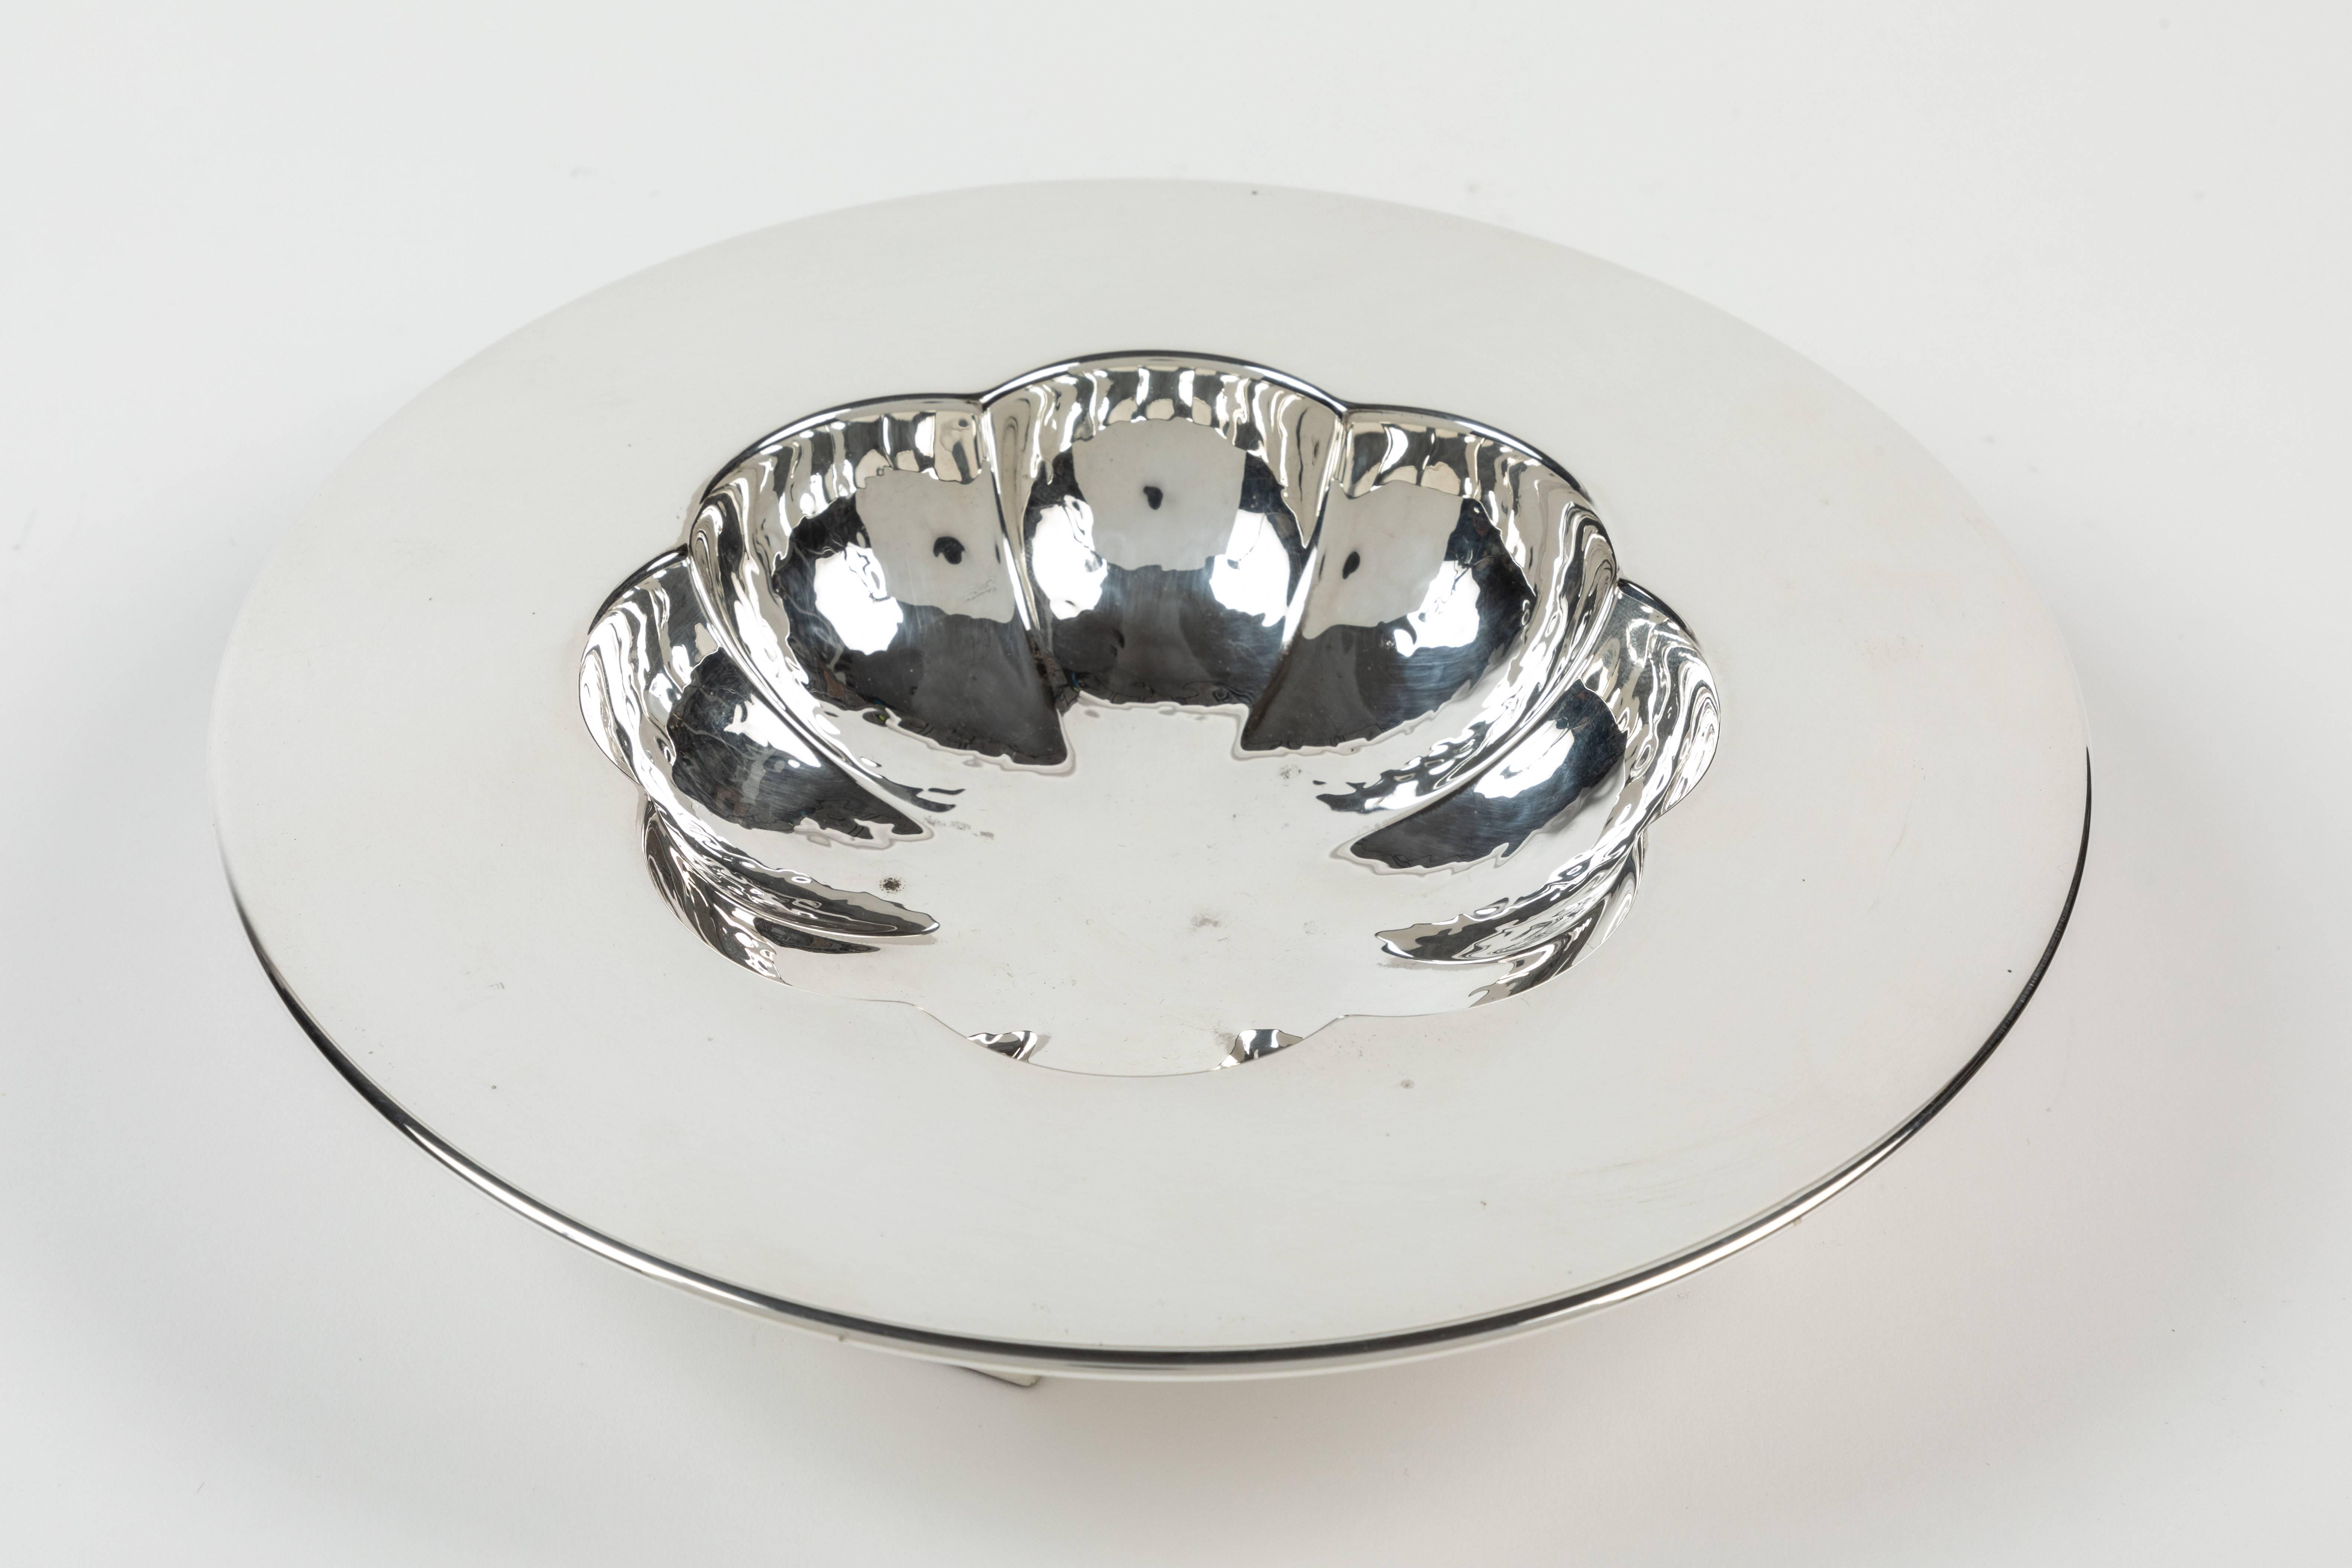 Here is a very famous design by Michael Graves for Swid Powell that is very difficult to find. The bowl is peen-hammered and sits on a fixed cruciform base. The initial drawings for this are in the Tapert book on page 40, and there is a photo of